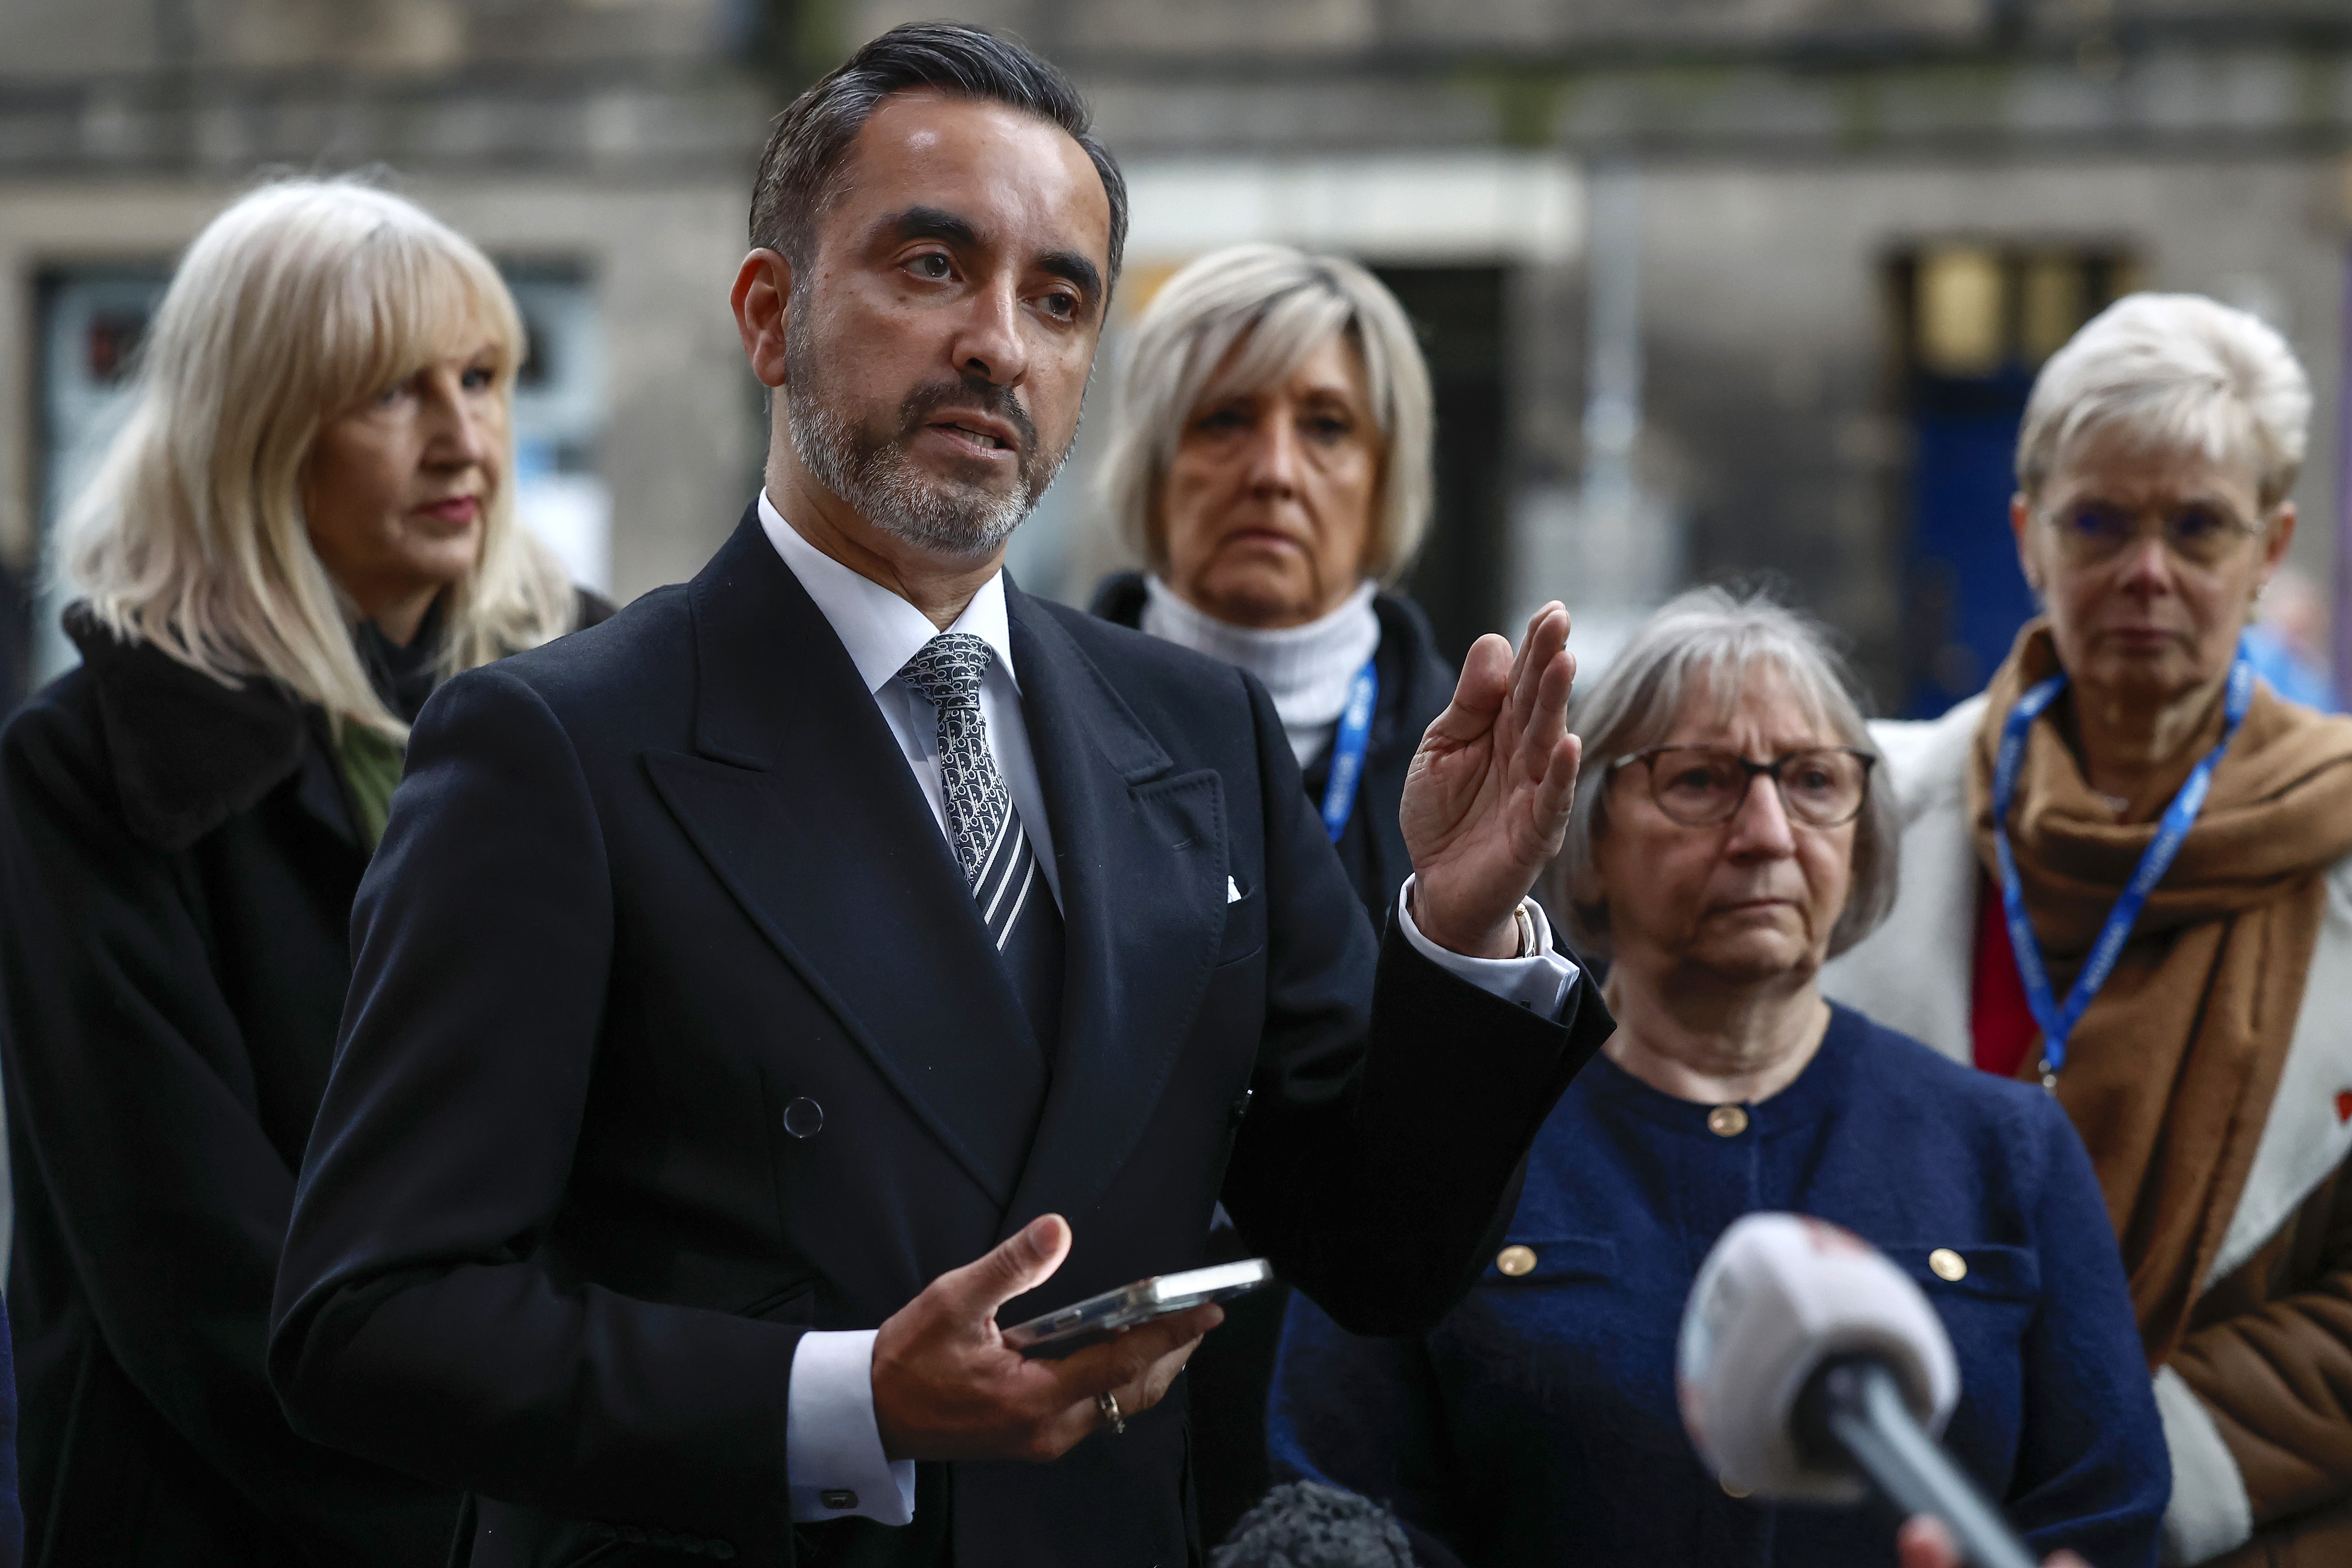 Aamer Anwar said he has been asked to consider filing a criminal complaint over the deletion of WhatsApps by Scottish Government officials.